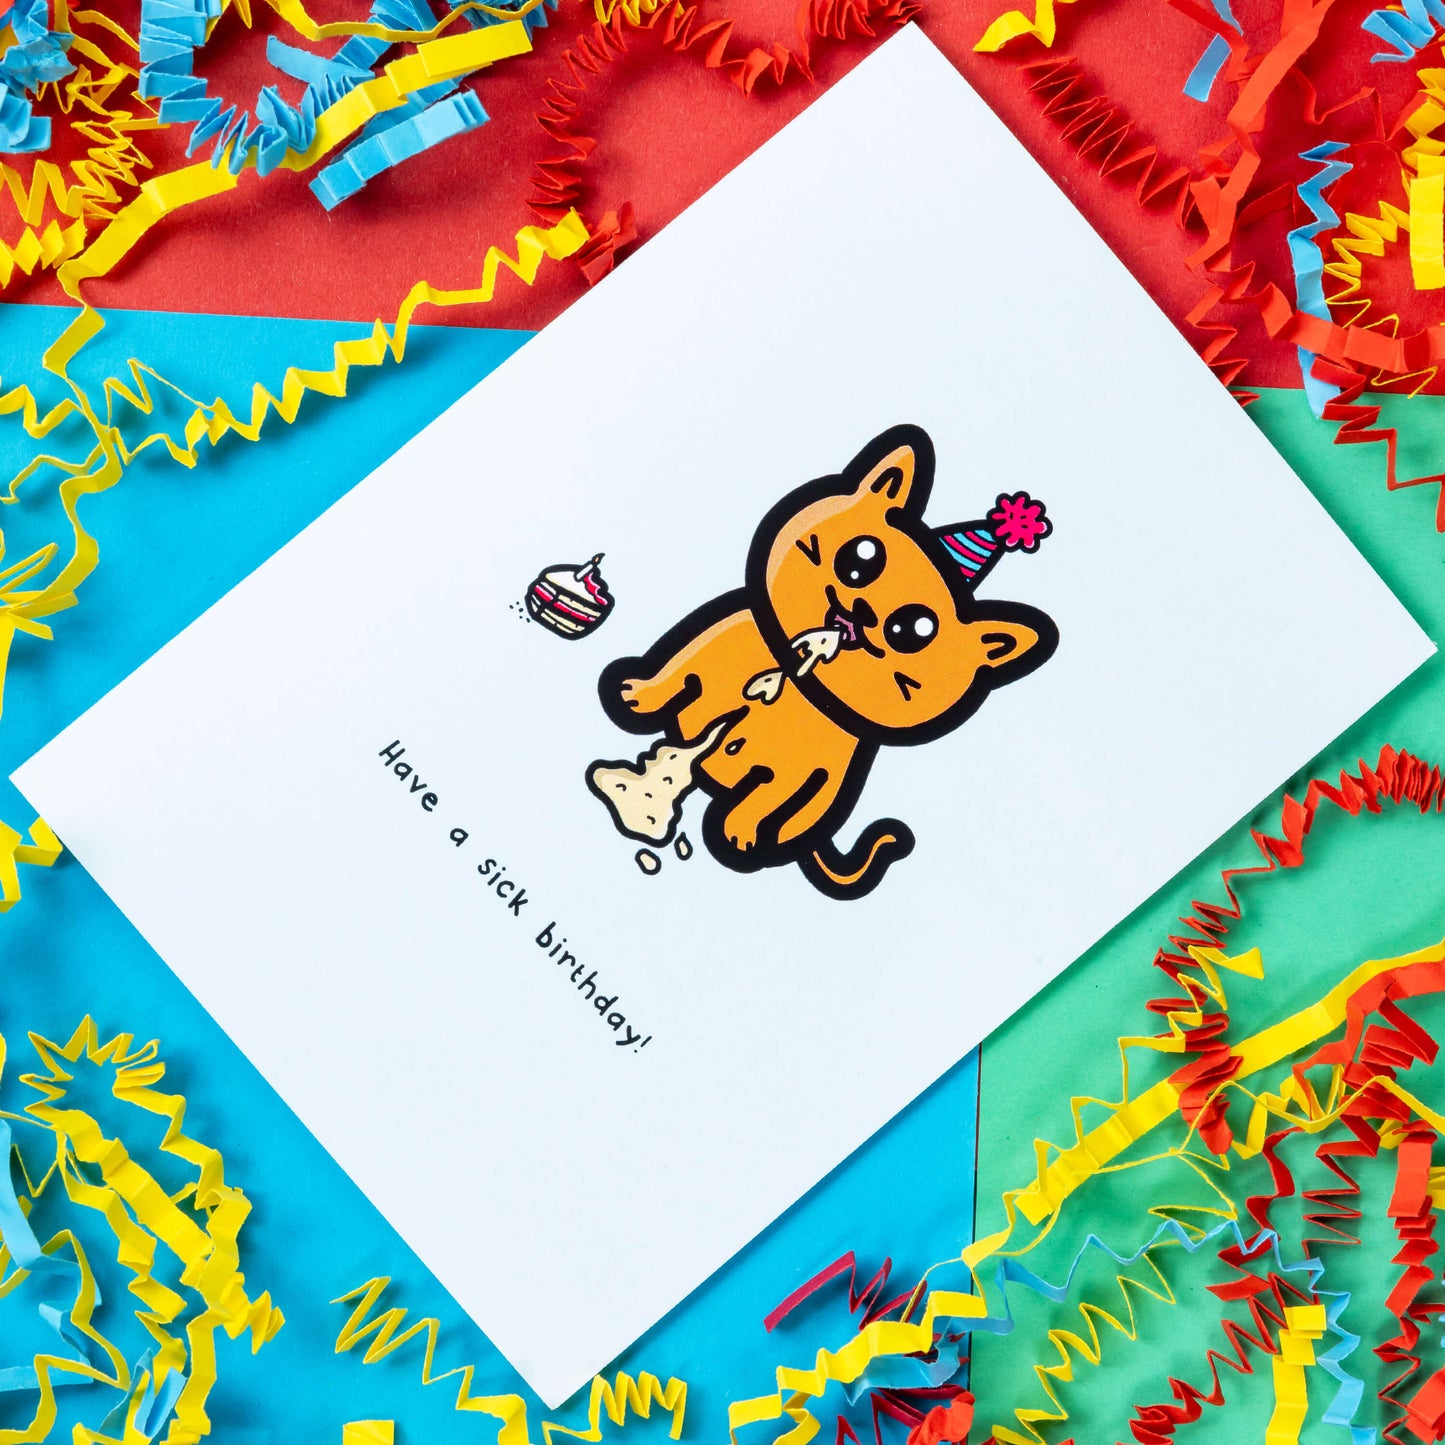 The Have a Sick Birthday Cat Card on a red, blue and green background with red, yellow and blue crinkle card confetti. The white a6 birthday card has an orange smiling cat with a party hat throwing up vomit all down itself next to a birthday cake slice, underneath in black reads 'have a sick birthday!'.